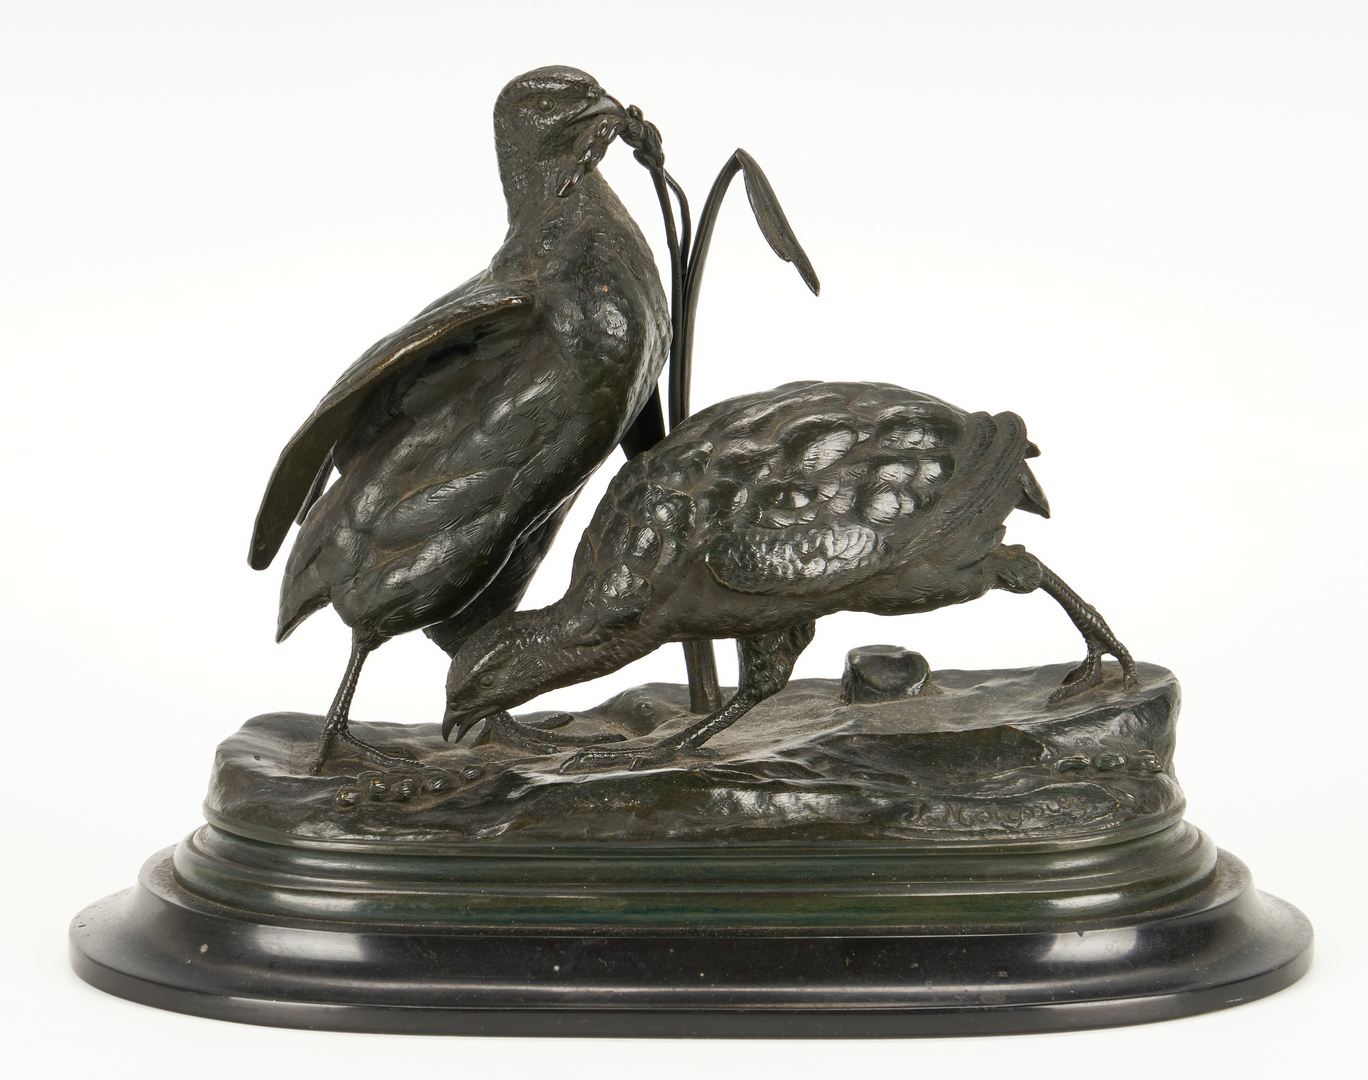 Lot 334: 4 French Bronze Animal Sculptures